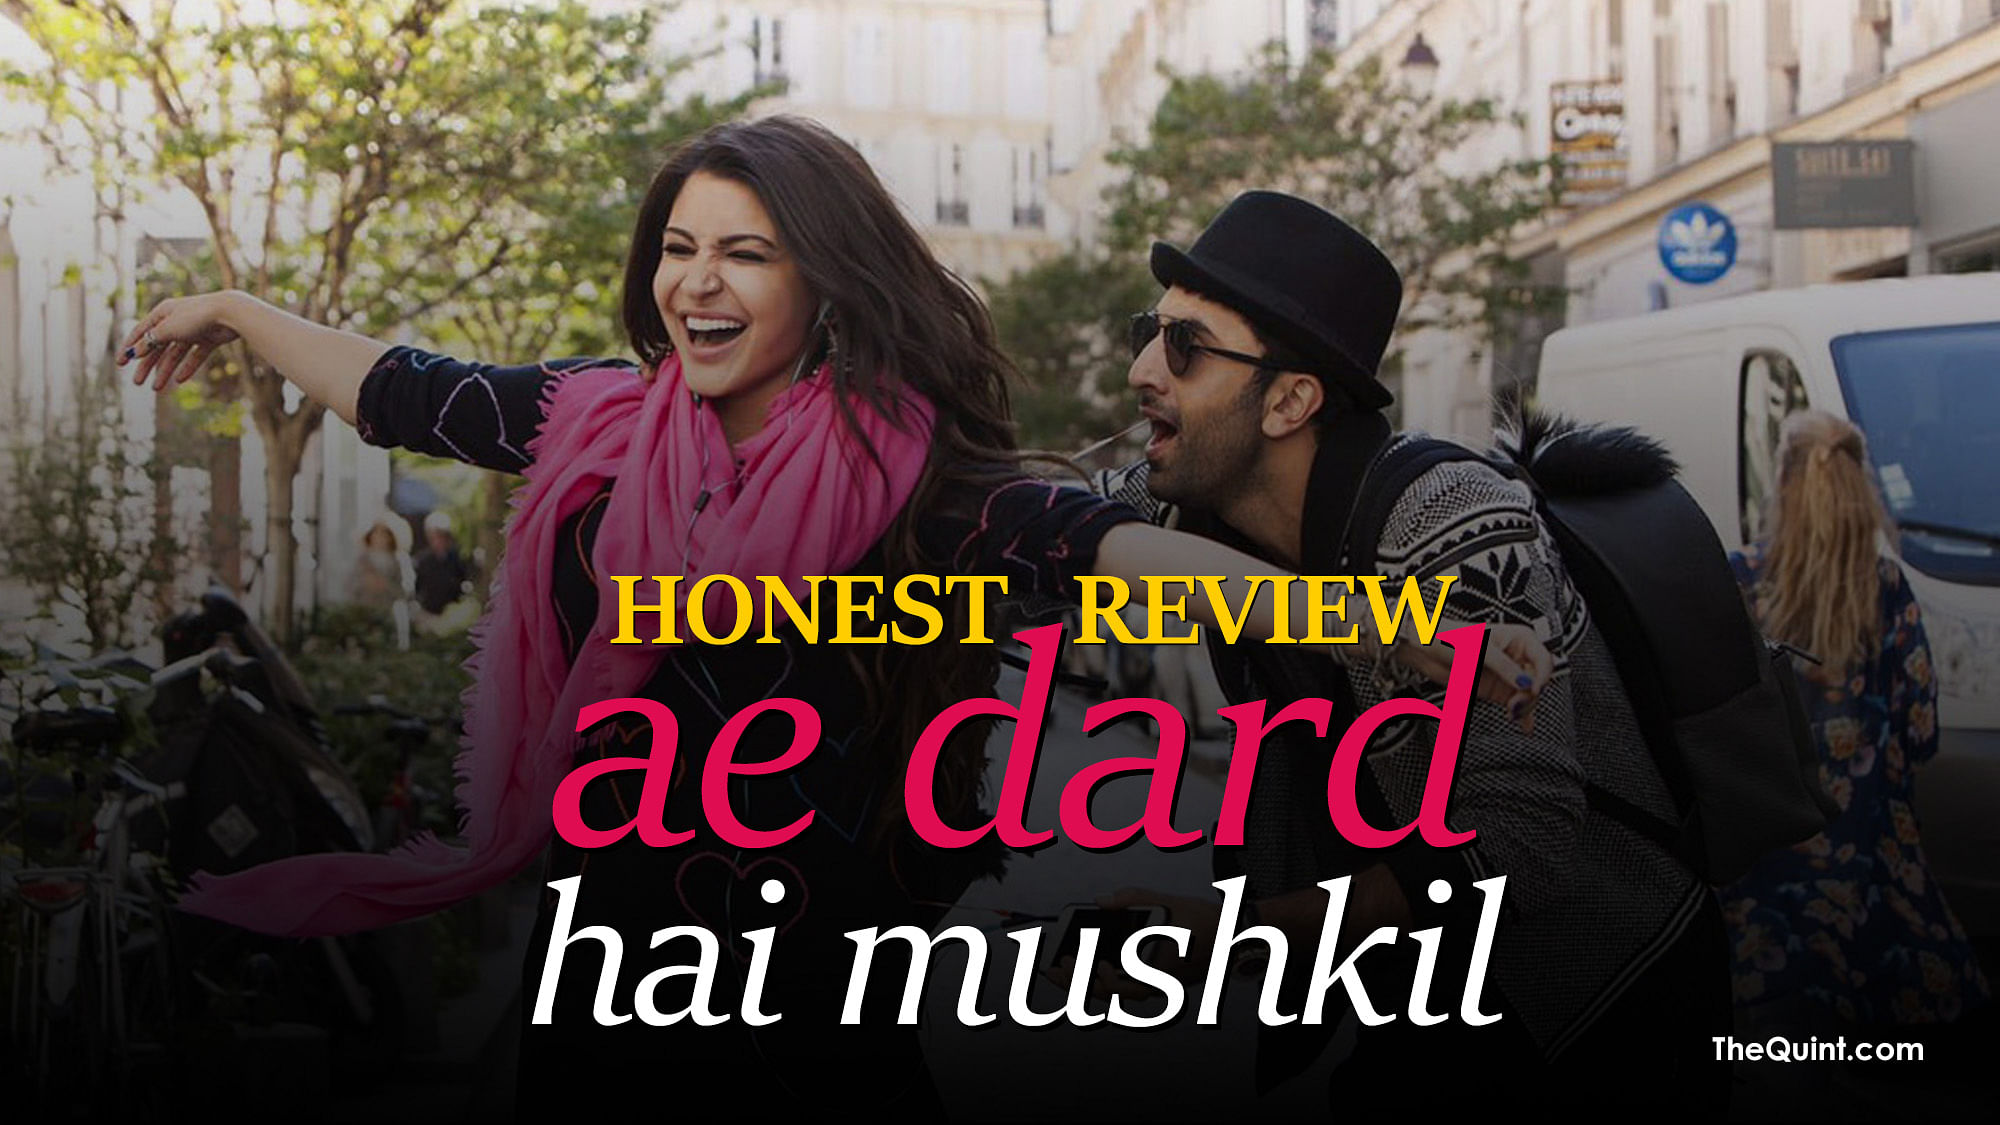 Here’s an honest review of Ae Dil Hai Mushkil. Yes, we understand your ‘<i>dard’</i>. Read it here.